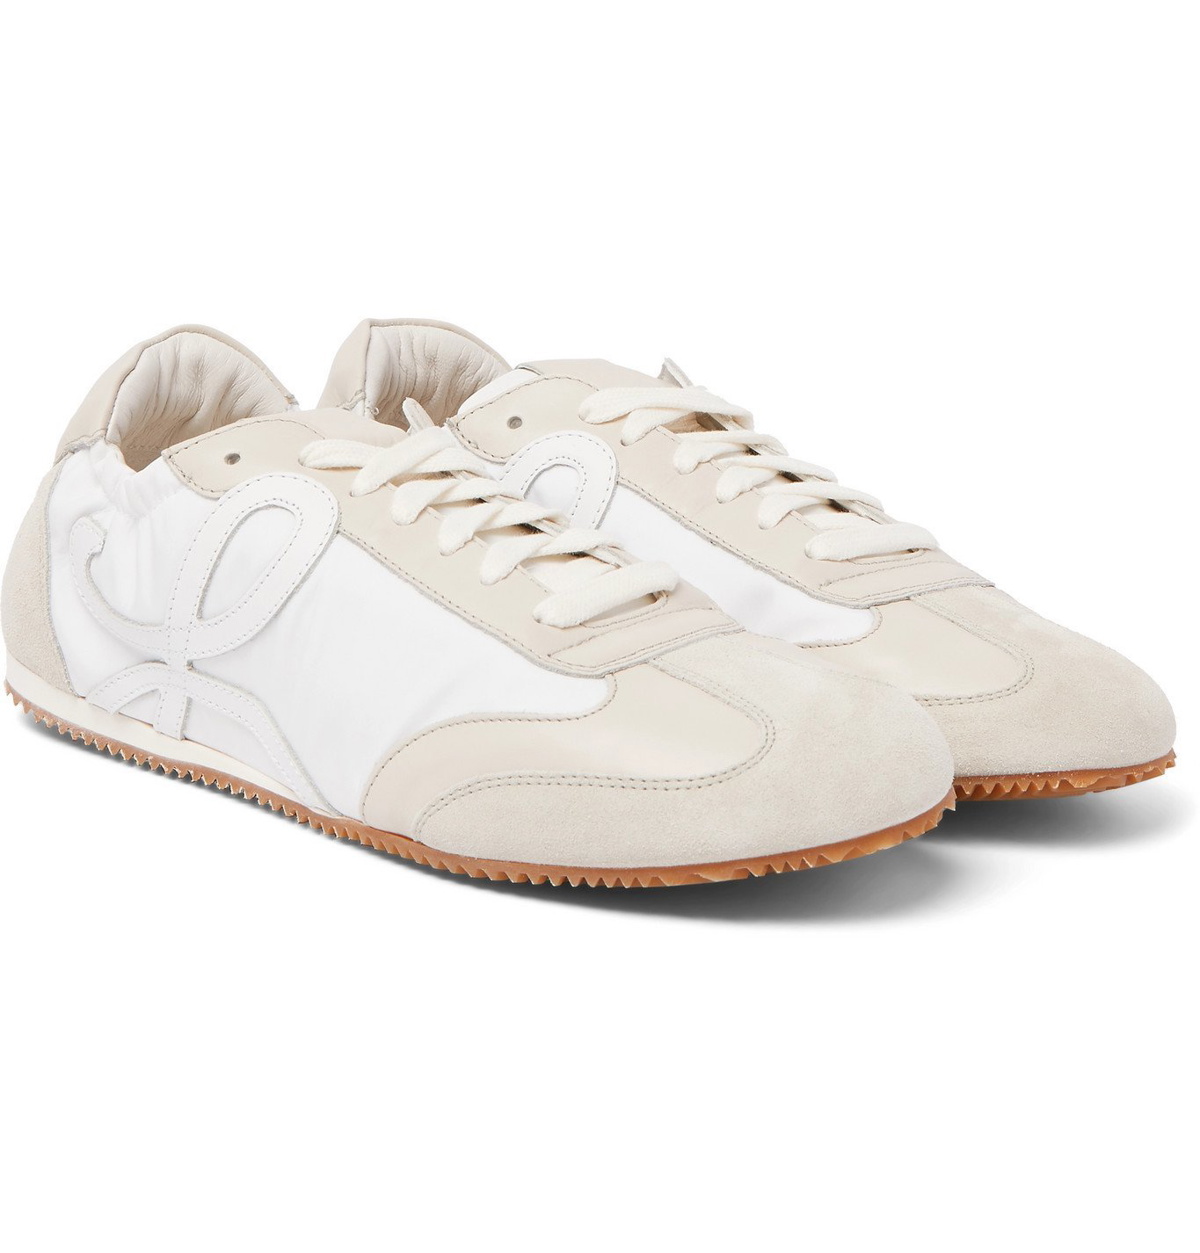 Loewe - Ballet Leather and Suede-Trimmed Nylon Sneakers - White Loewe